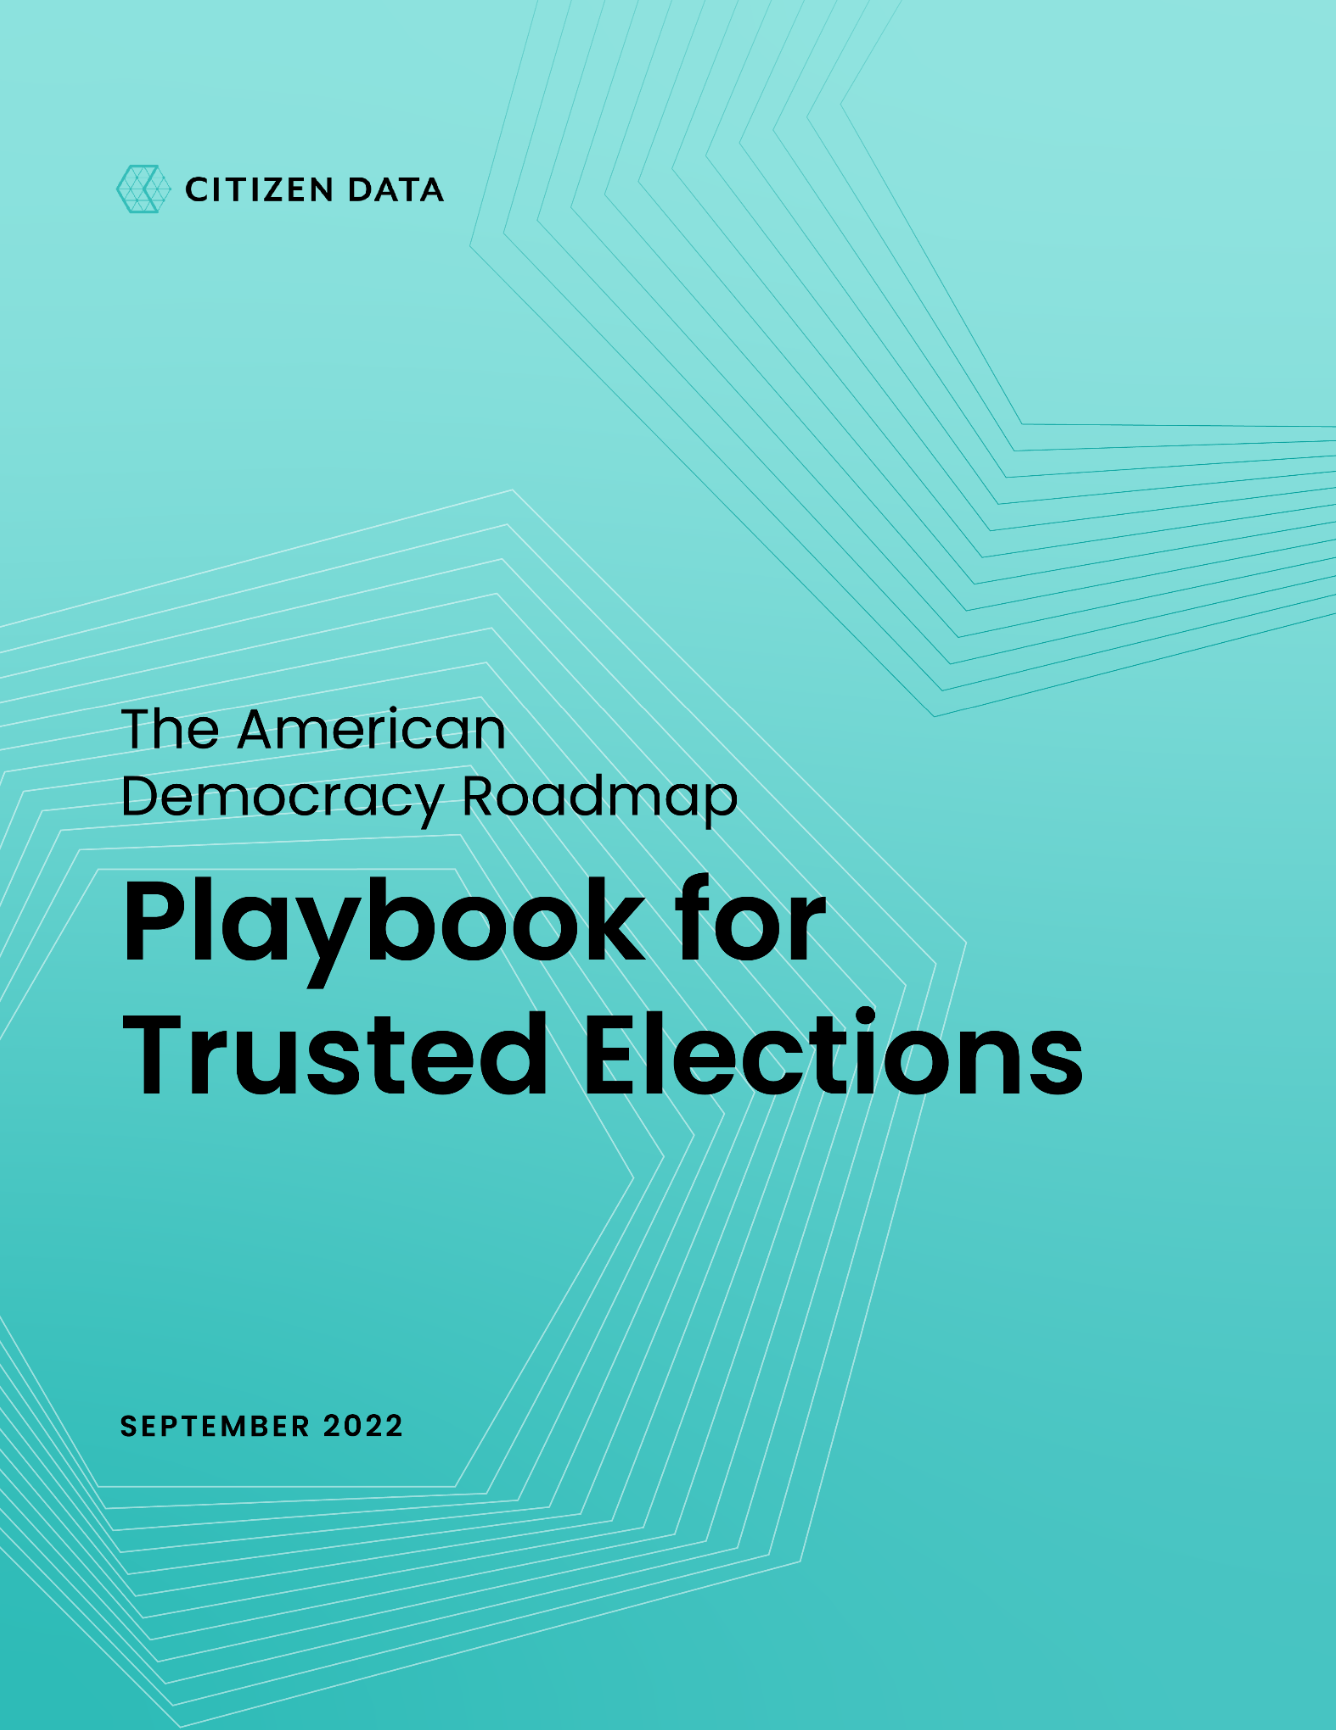 Citizen Data's Playbook for Trusted Elections